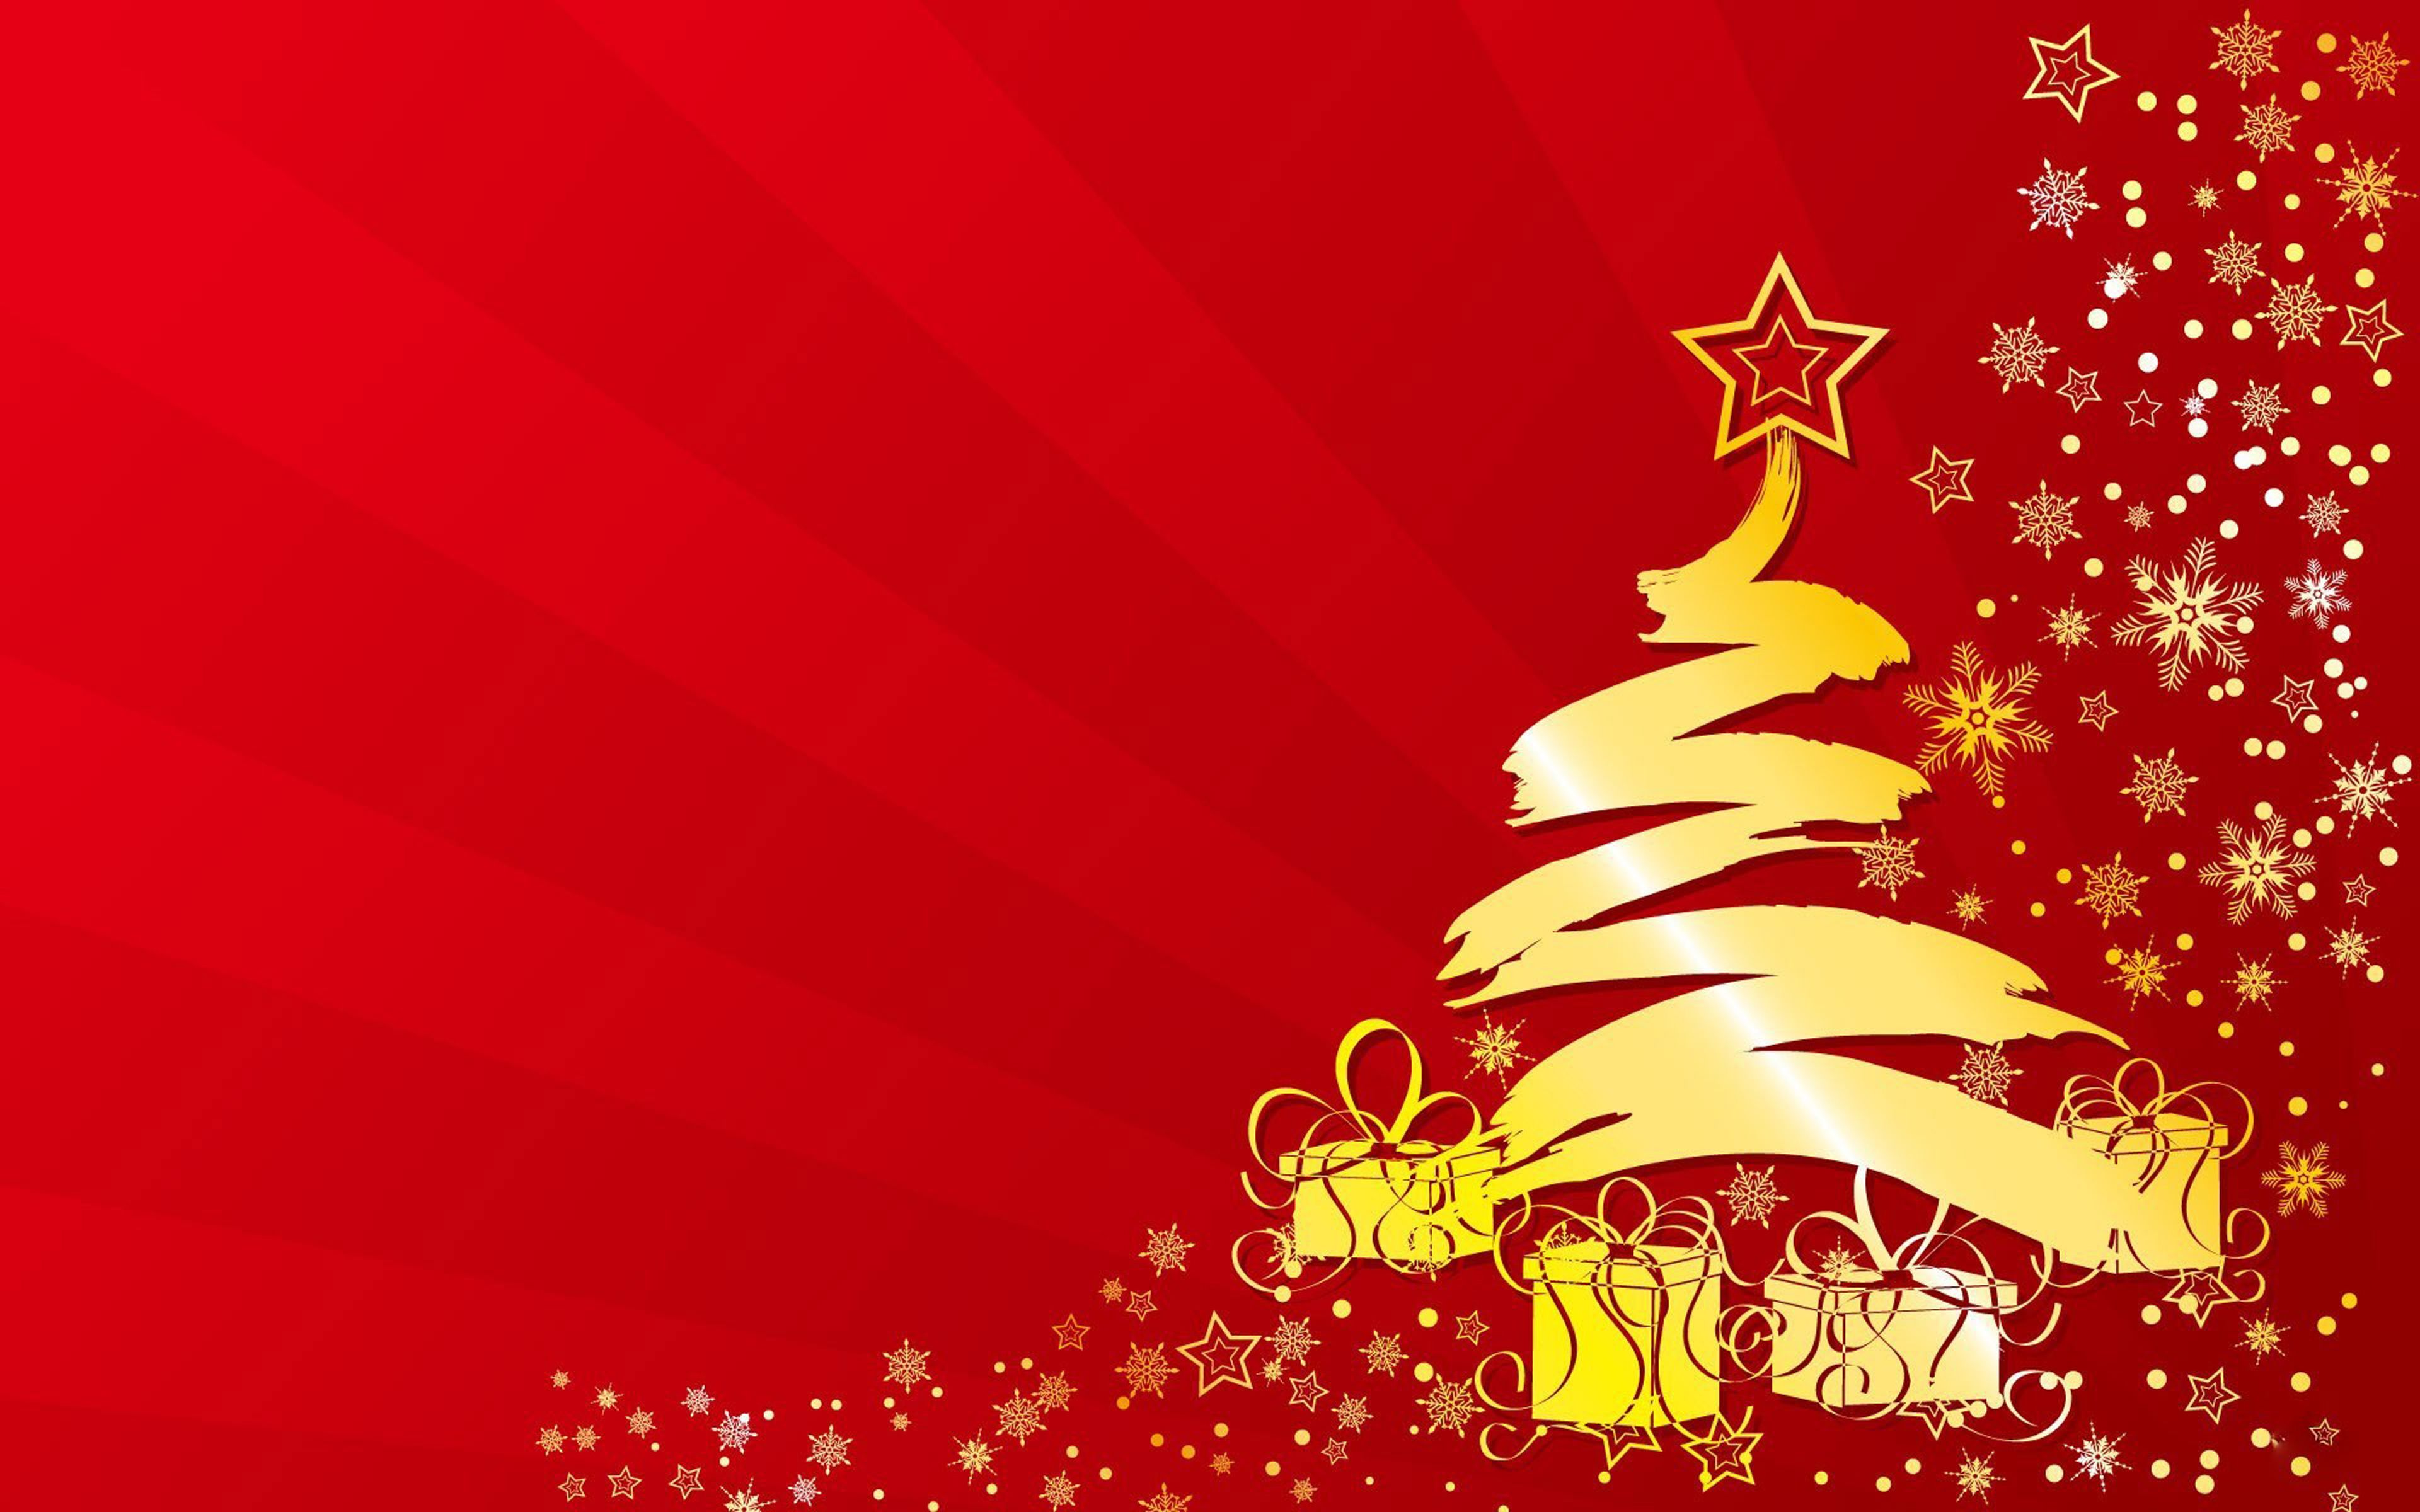 Merry Christmas Yellow Christmas Tree Stars Gifts Winter Abstract Red Wallpaper HD 3840x2400, Wallpaper13.com